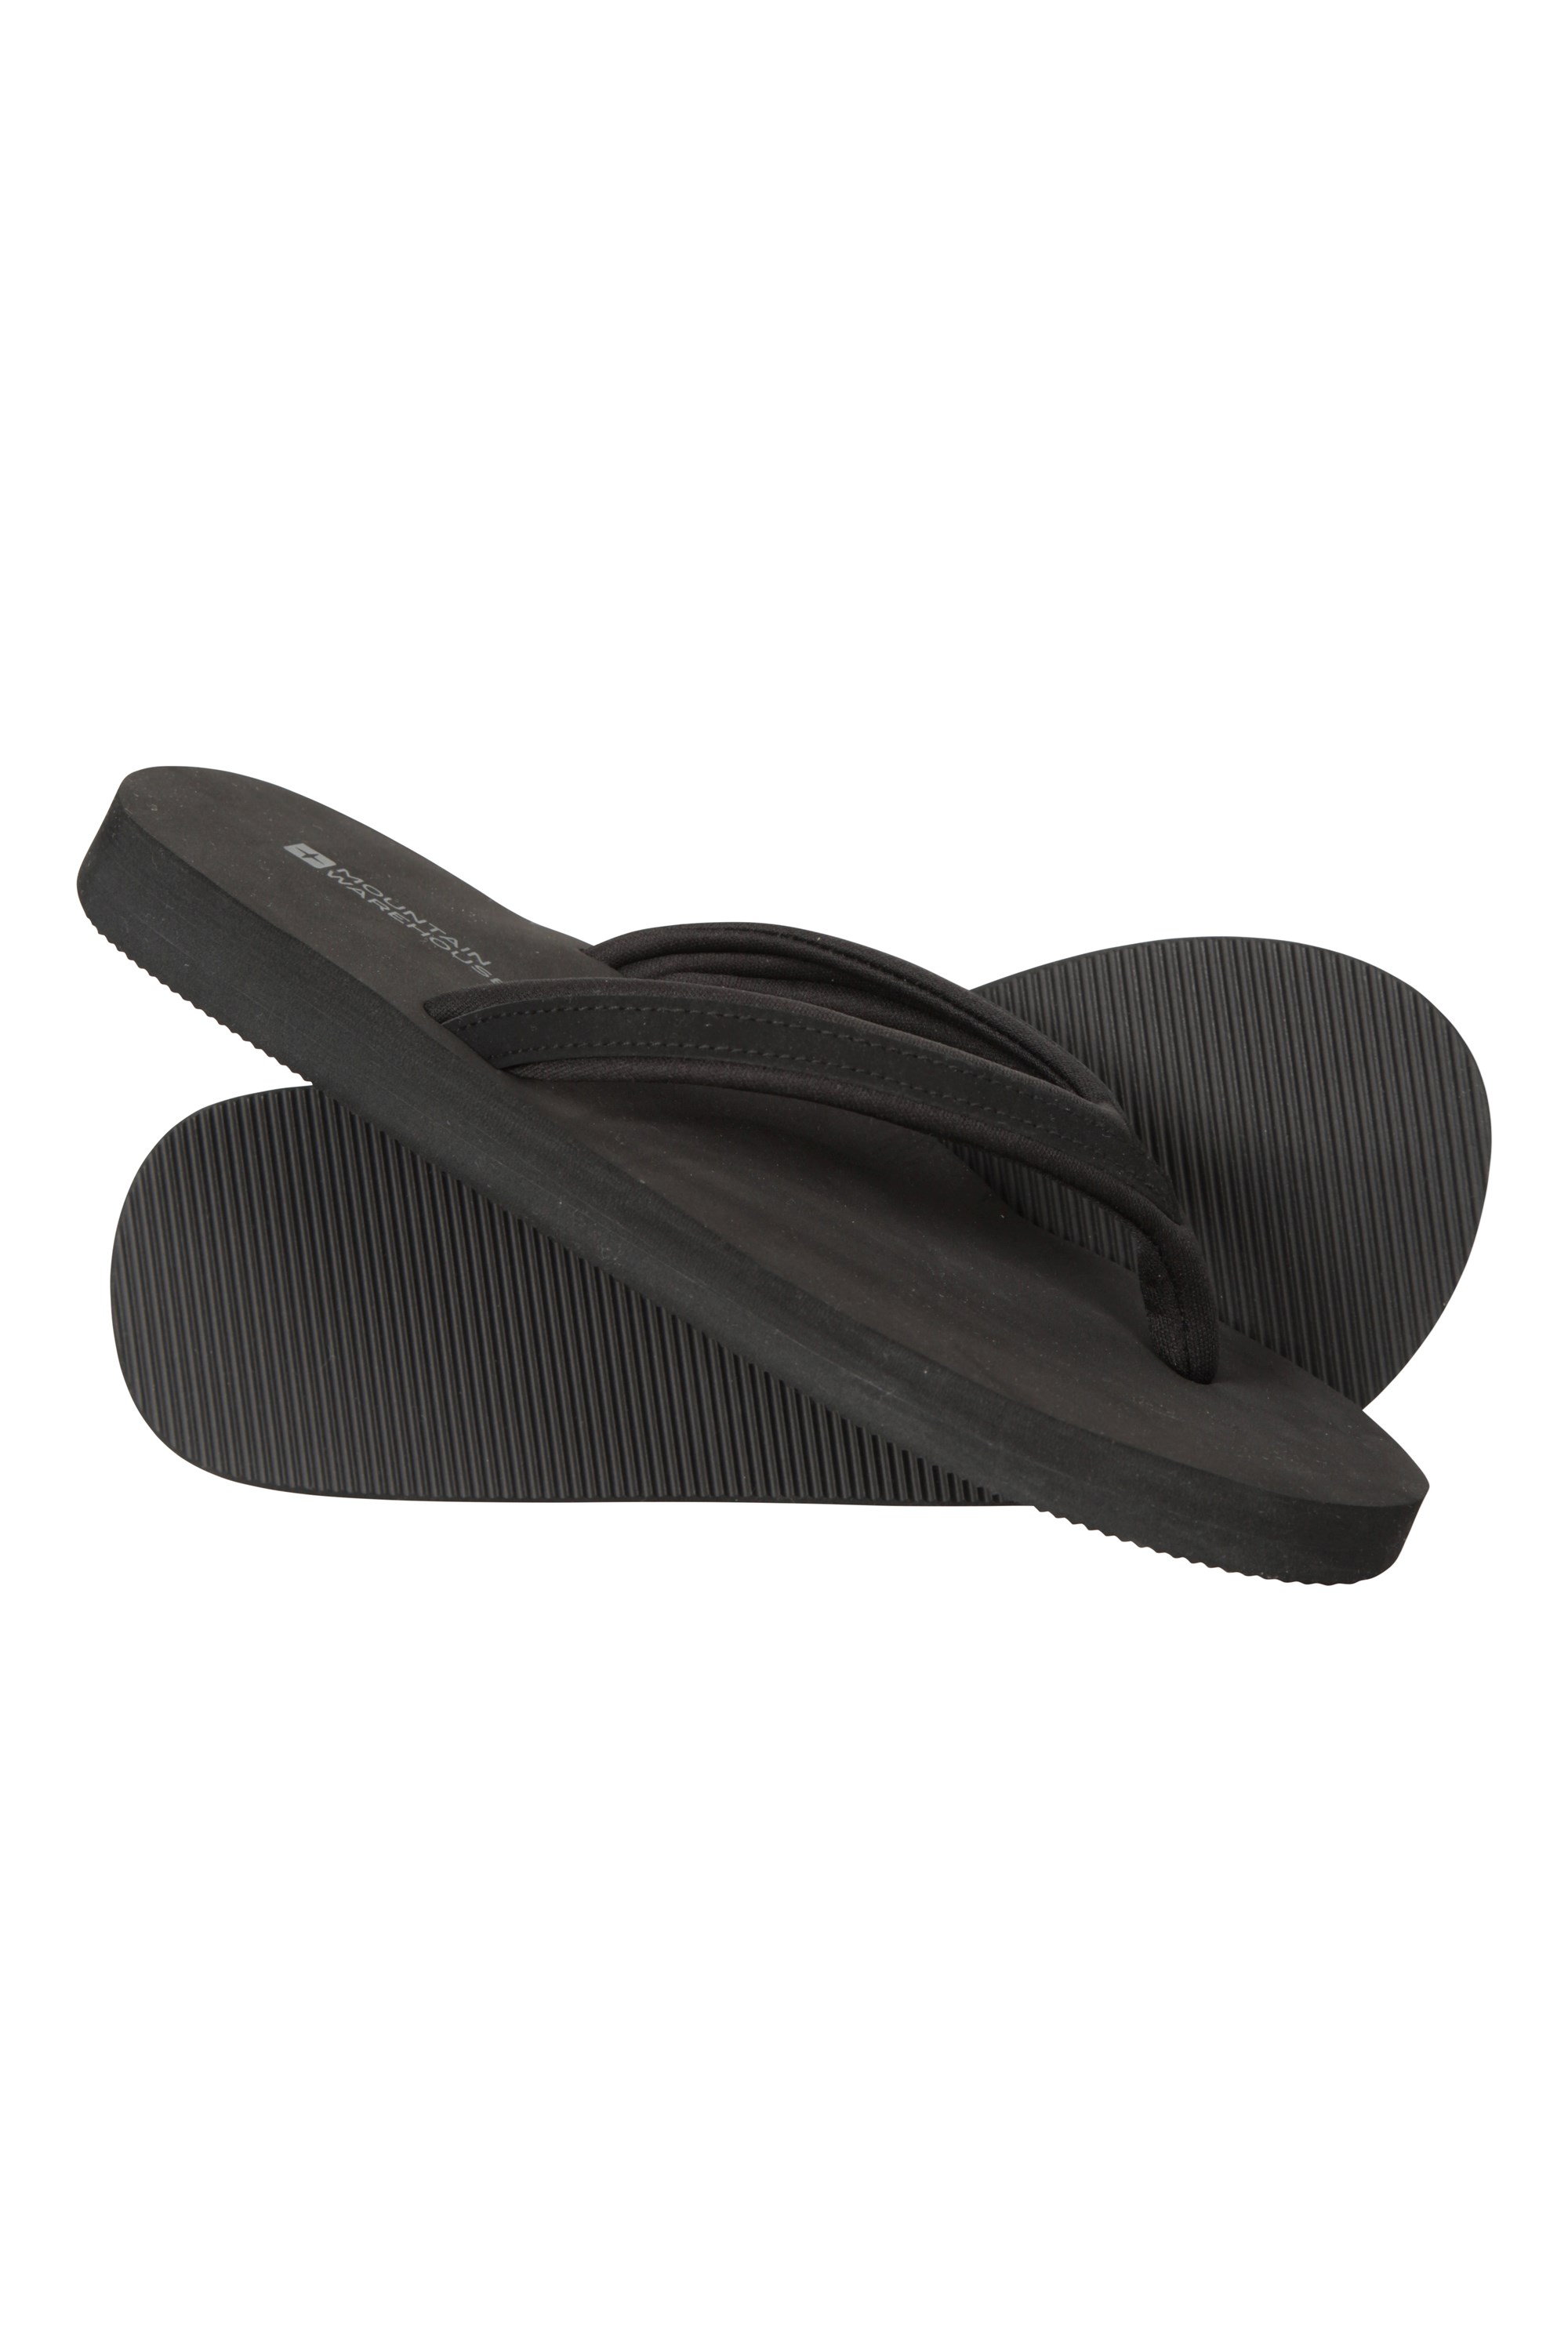 Vacation Womens Recycled Flip Flops - Black